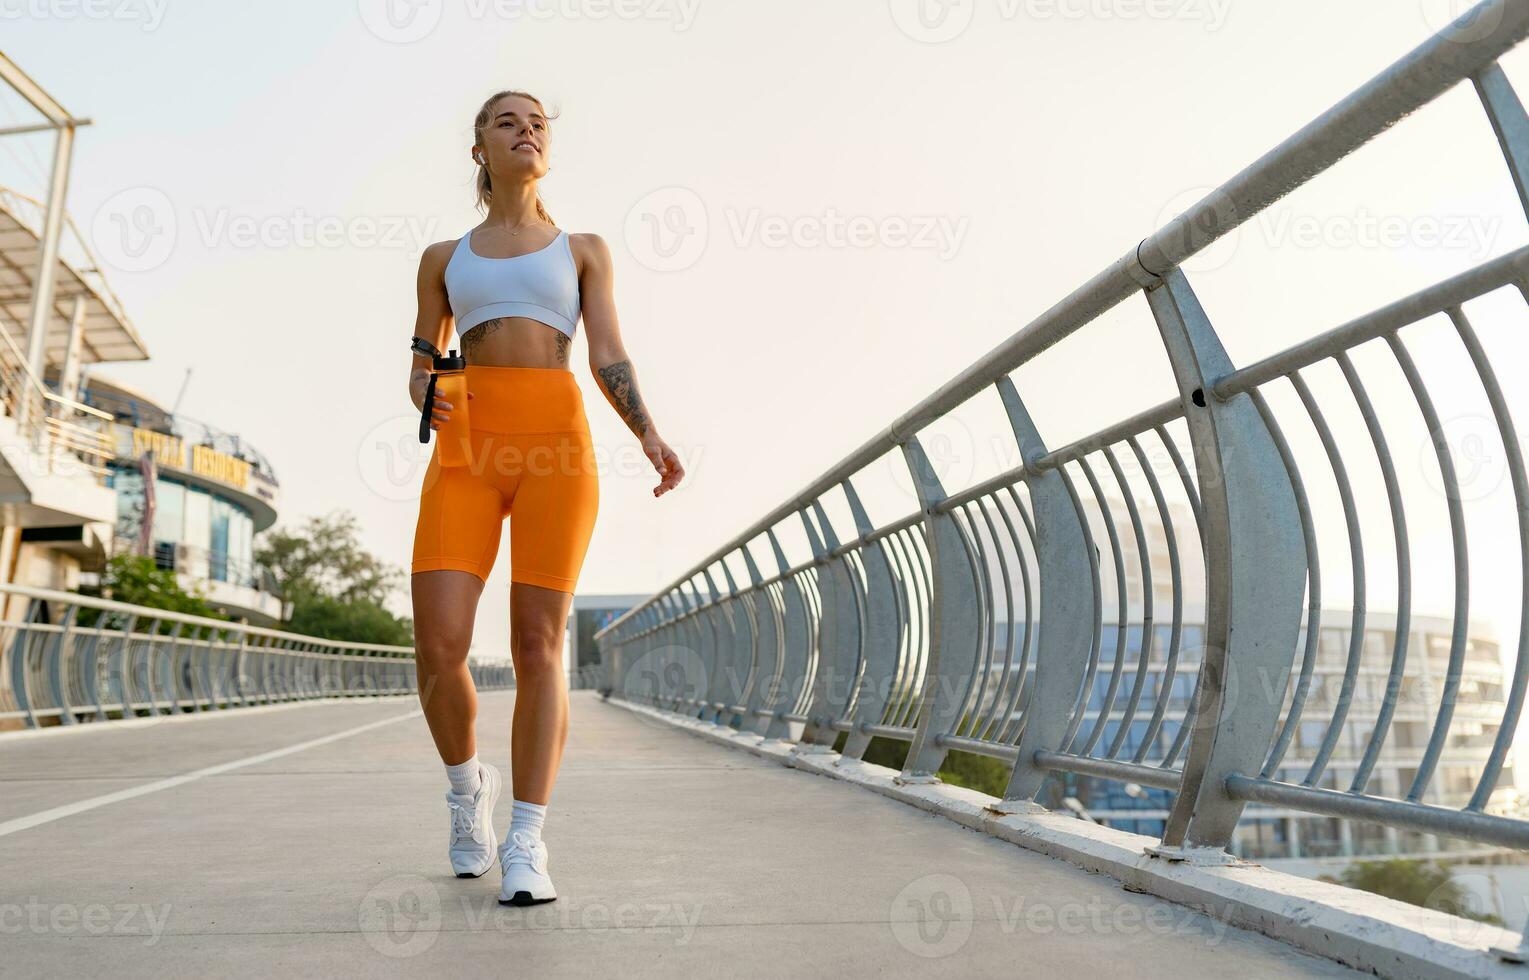 https://static.vecteezy.com/system/resources/previews/029/068/824/non_2x/pretty-young-smiling-woman-doing-sports-in-the-morning-in-stylish-sport-outfit-sportswear-skinny-strong-body-healthy-fit-lifestyle-photo.jpg